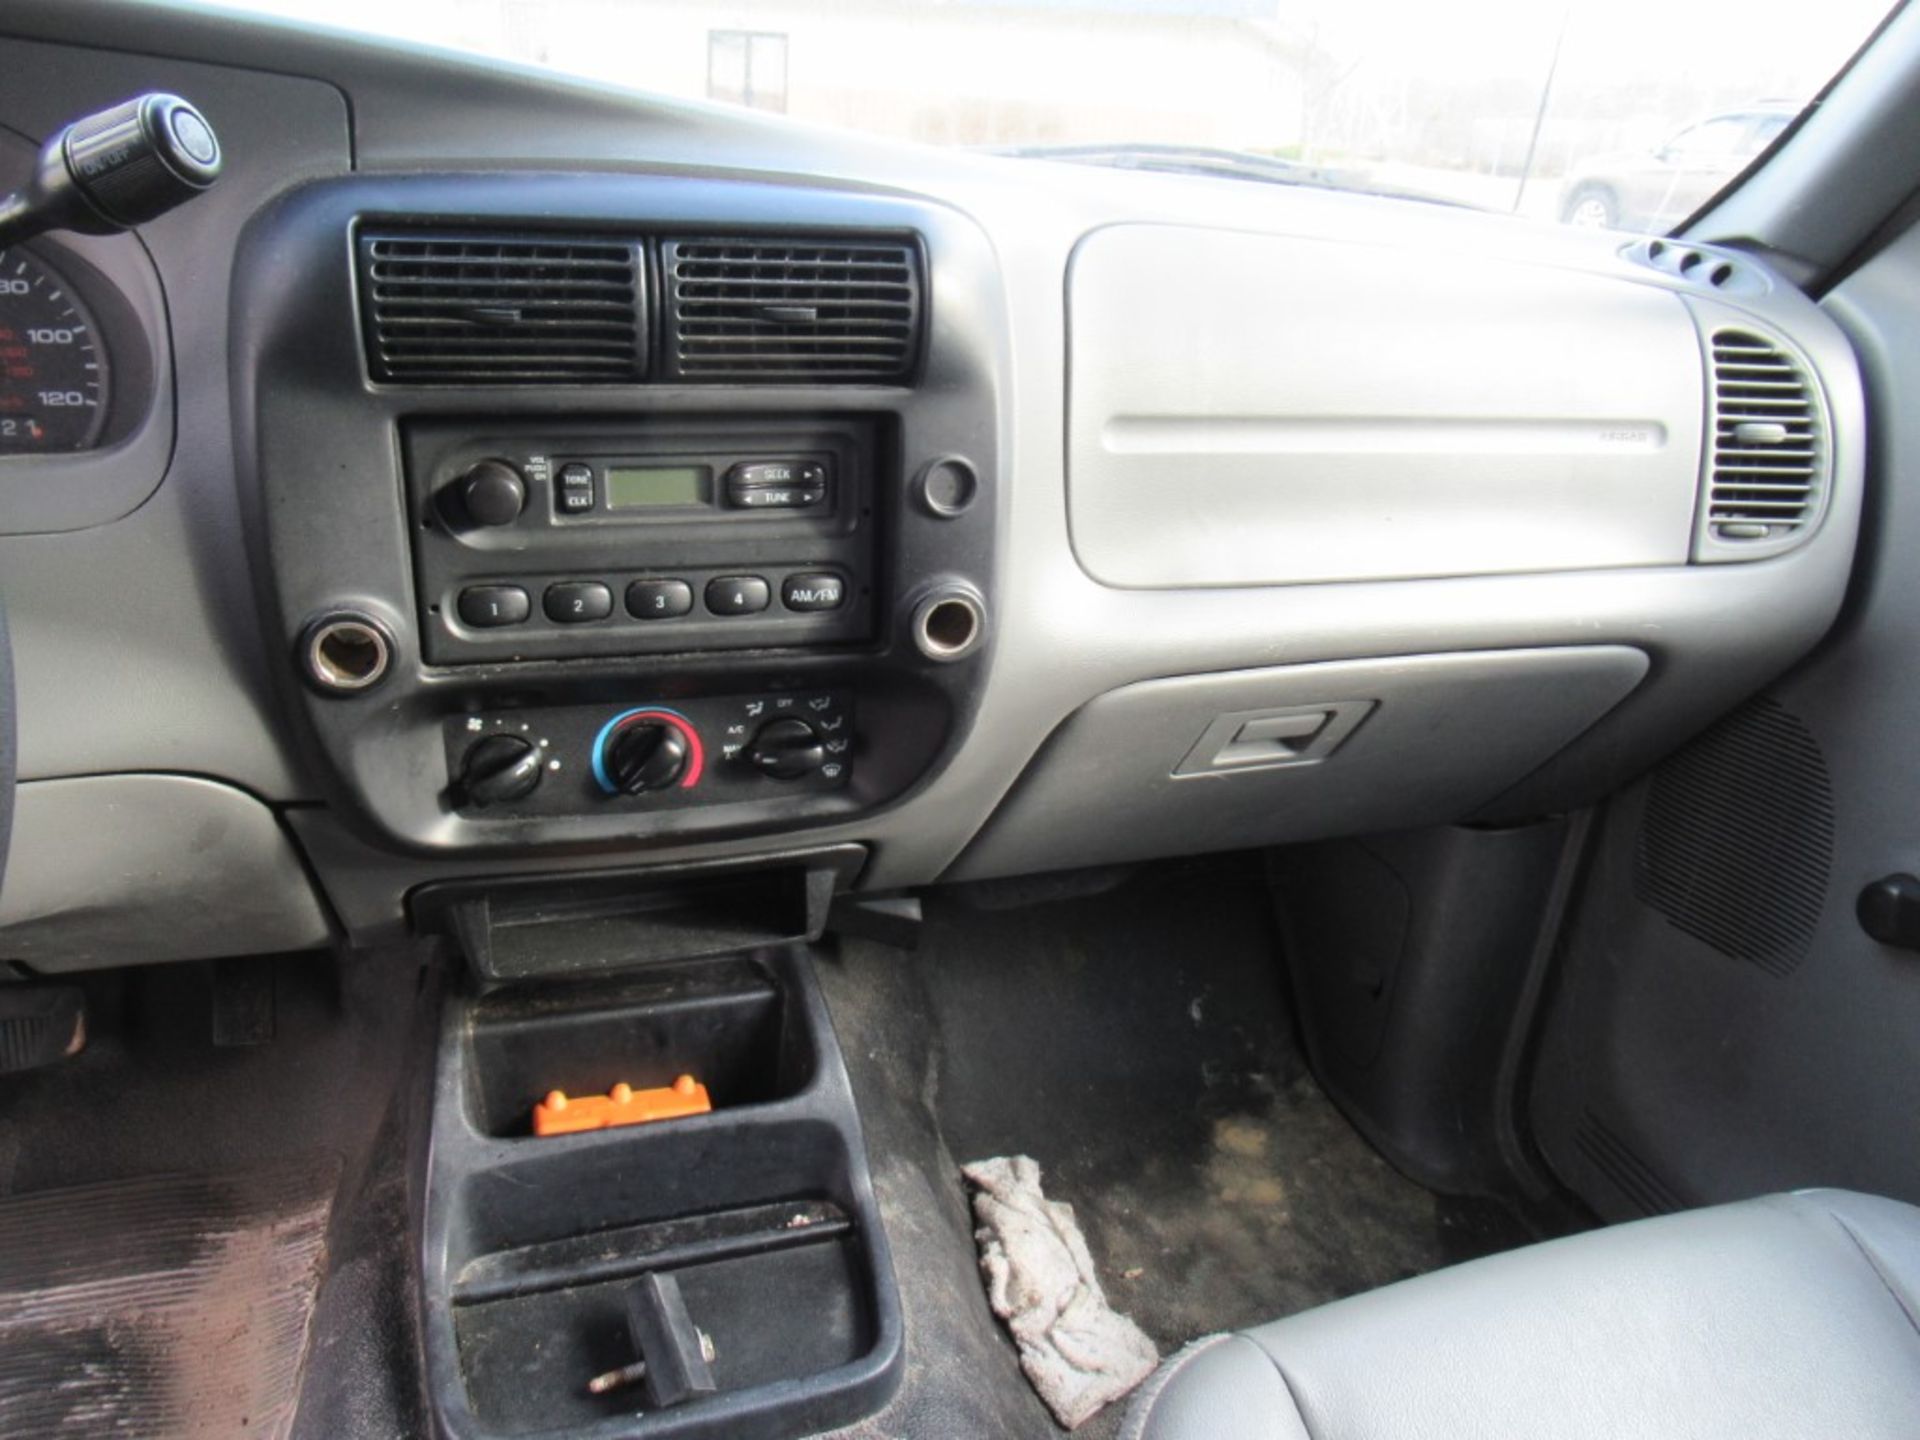 2009 Ford Ranger Pickup, VIN 1FTYR10D79PA62694, Regular Cab, Automatic, AC, AM/FM, Cap, Started with - Image 24 of 25